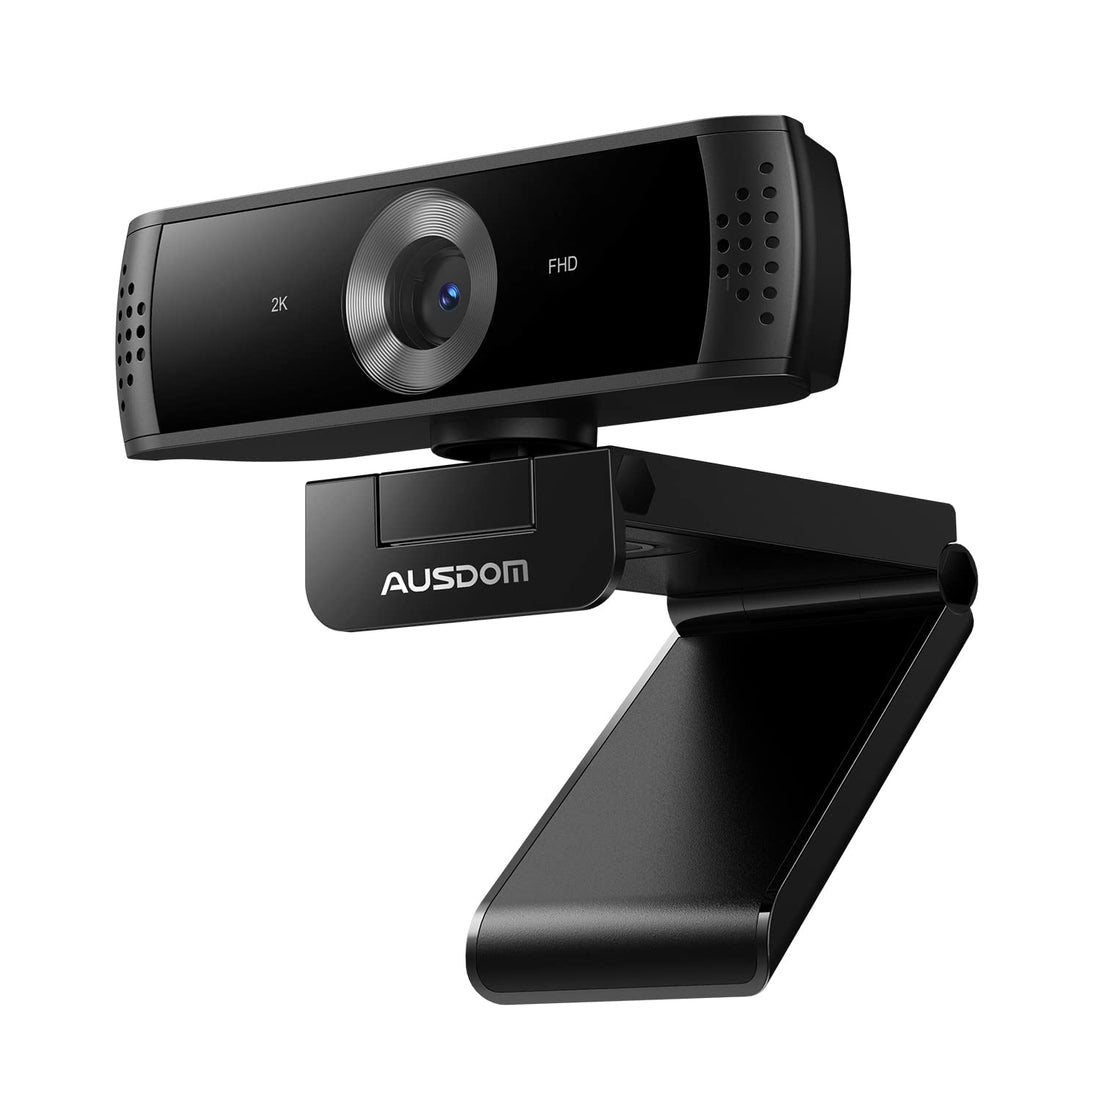 AUSDOM 2K Webcam, Live Streaming Web Camera with Microphone, Desktop or Laptop USB Webcam with 75 Degree View Angle, HD Webcam for Video Calling, Recording, Conferencing, Streaming, Gaming